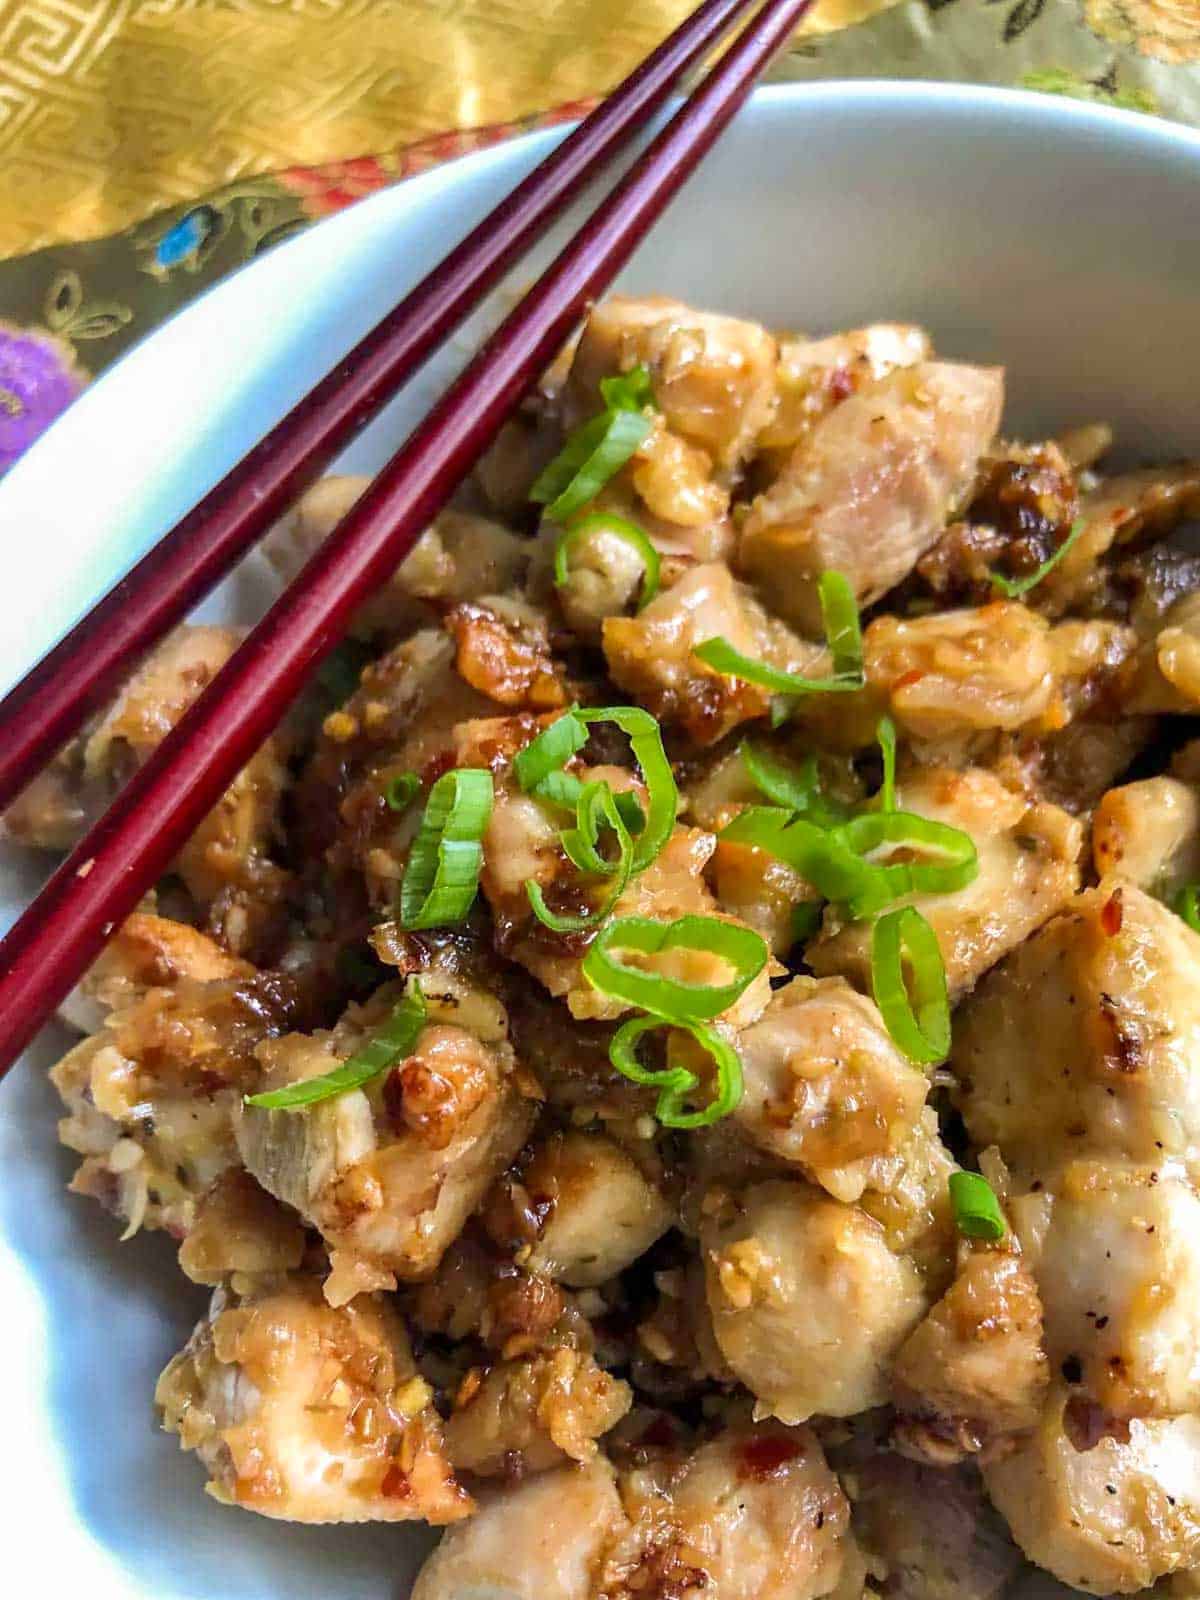 Vietnamese Lemongrass Chicken garnished with green onions in a bowl. There is a pair of chopsticks resting on the side of the bowl.